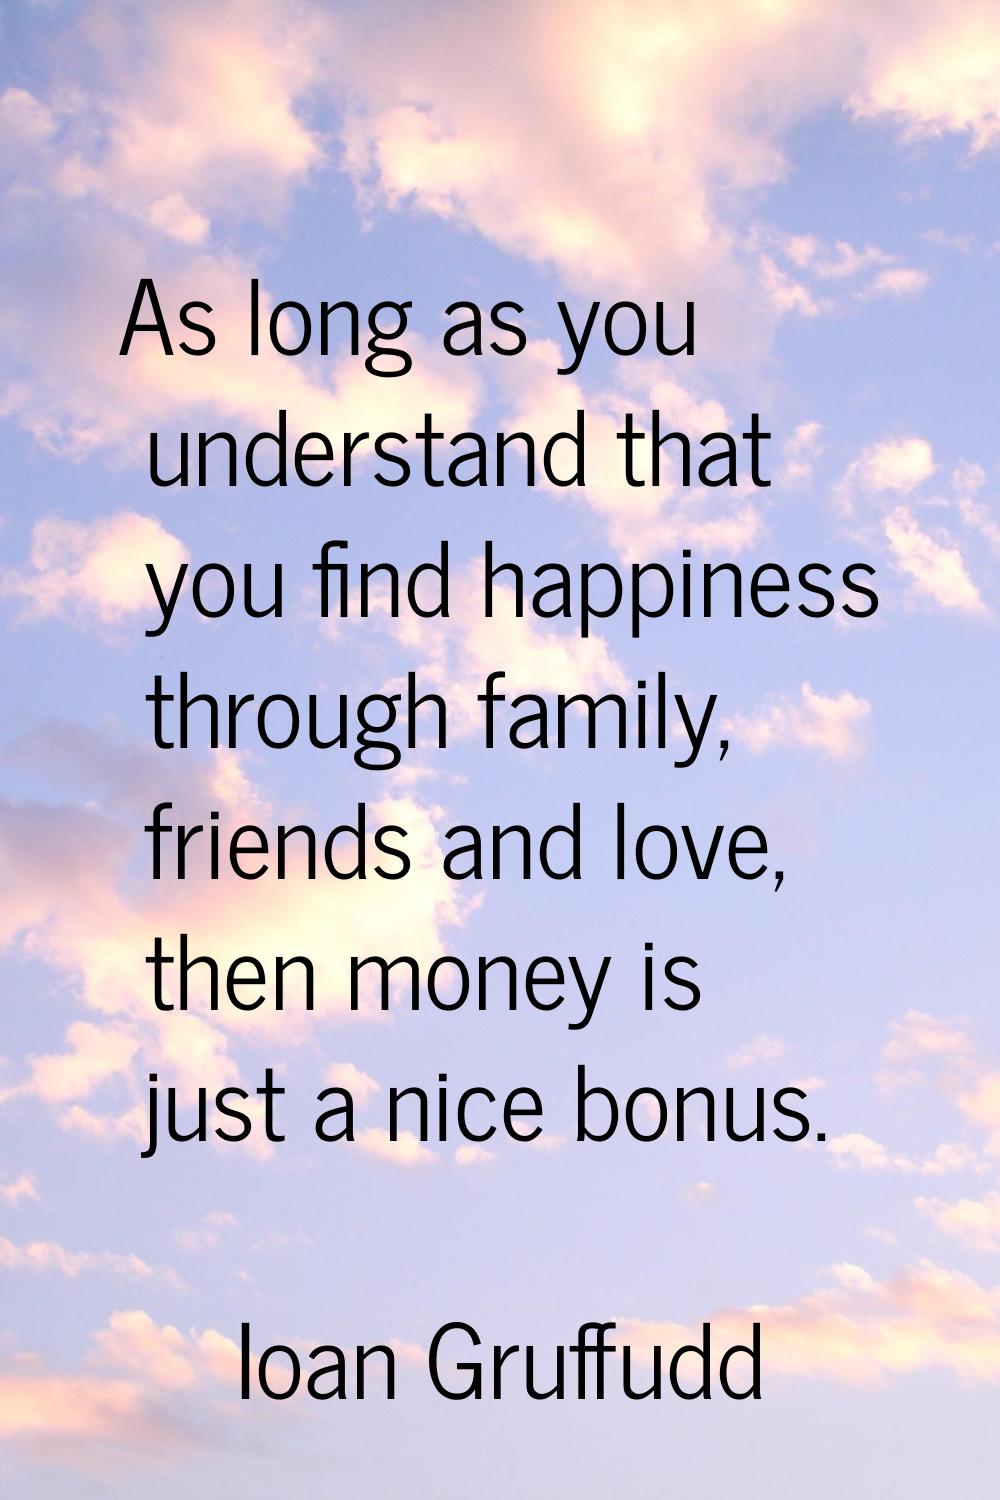 As long as you understand that you find happiness through family, friends and love, then money is j